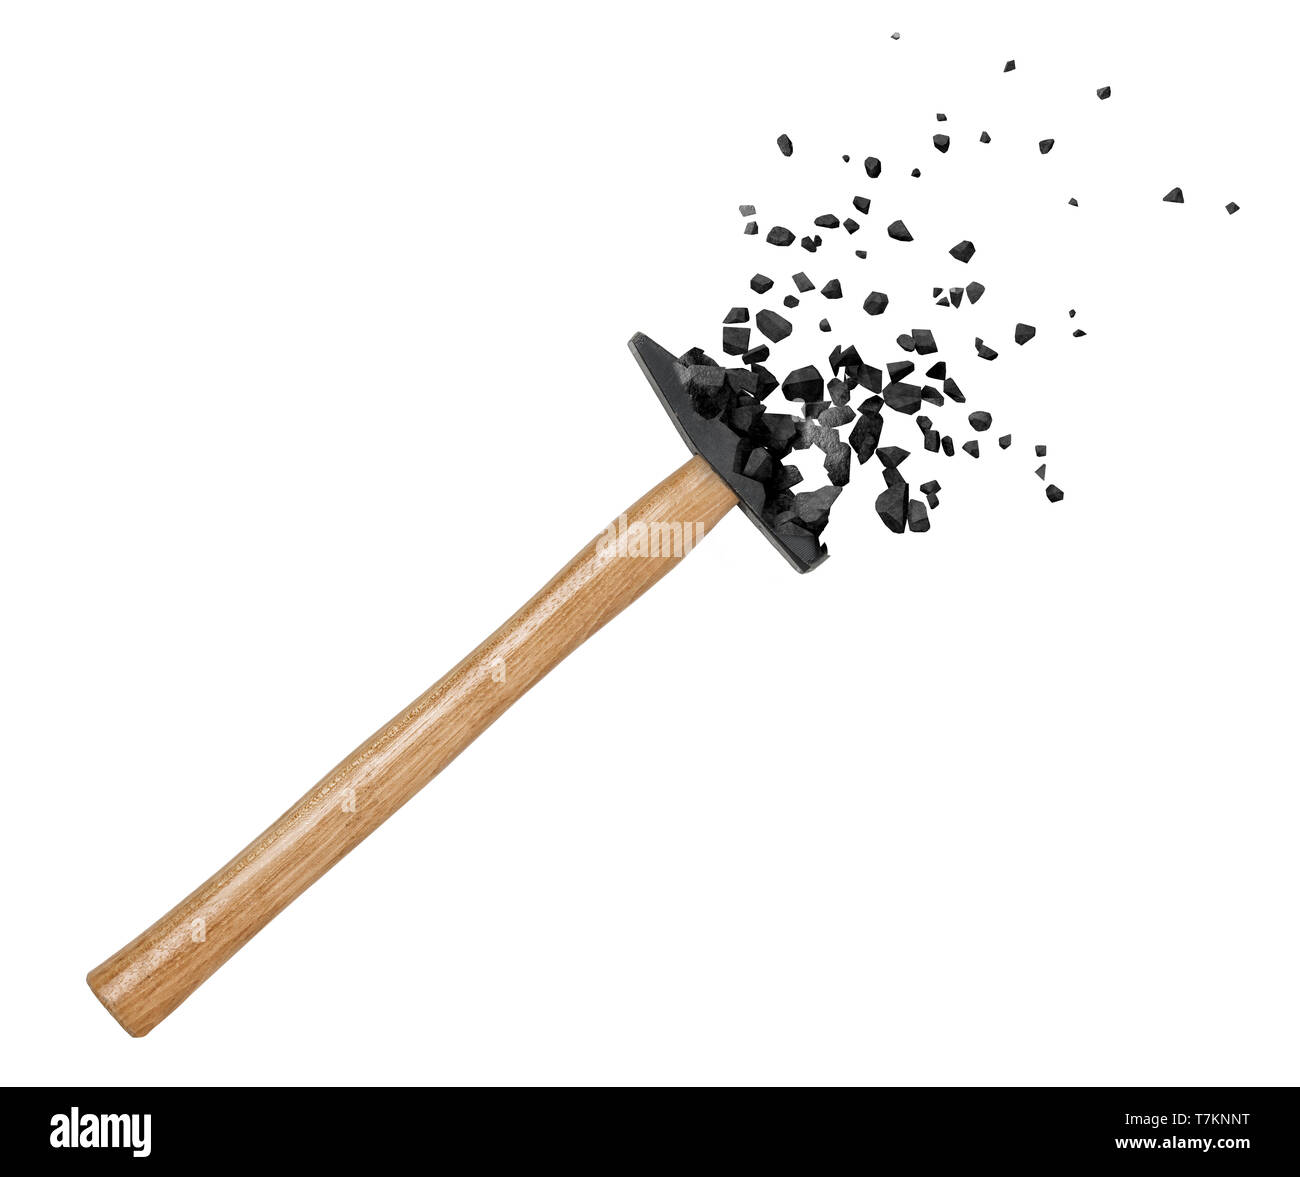 3d Close Up Rendering Of Hammer Starting To Break Into Pieces At Its Head Isolated On White Background Stock Photo Alamy